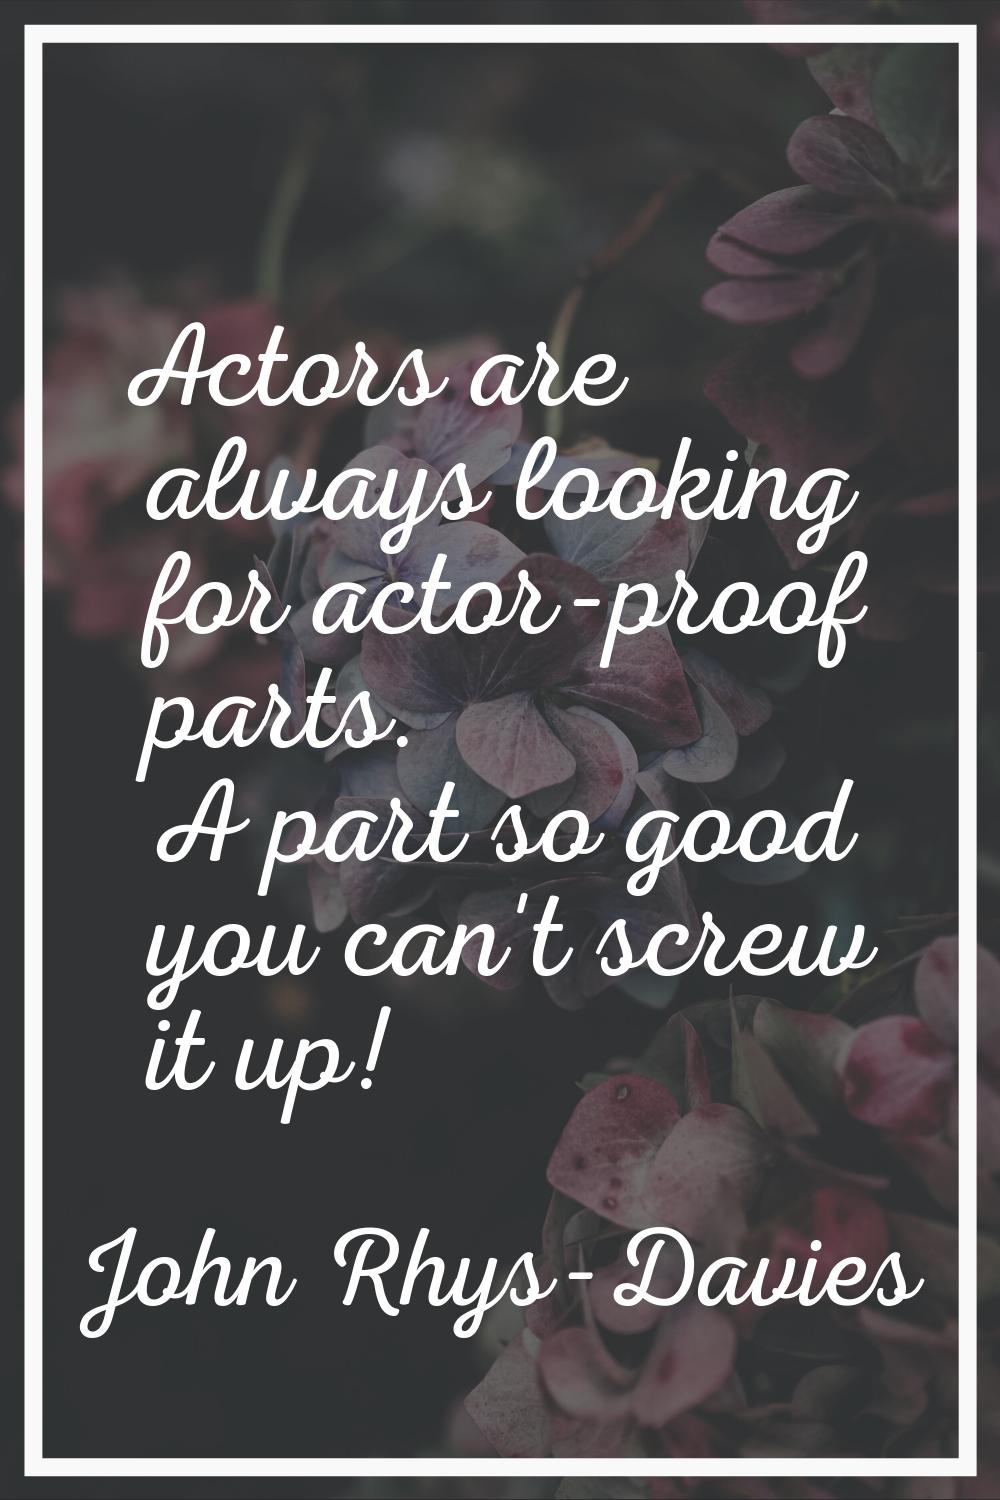 Actors are always looking for actor-proof parts. A part so good you can't screw it up!